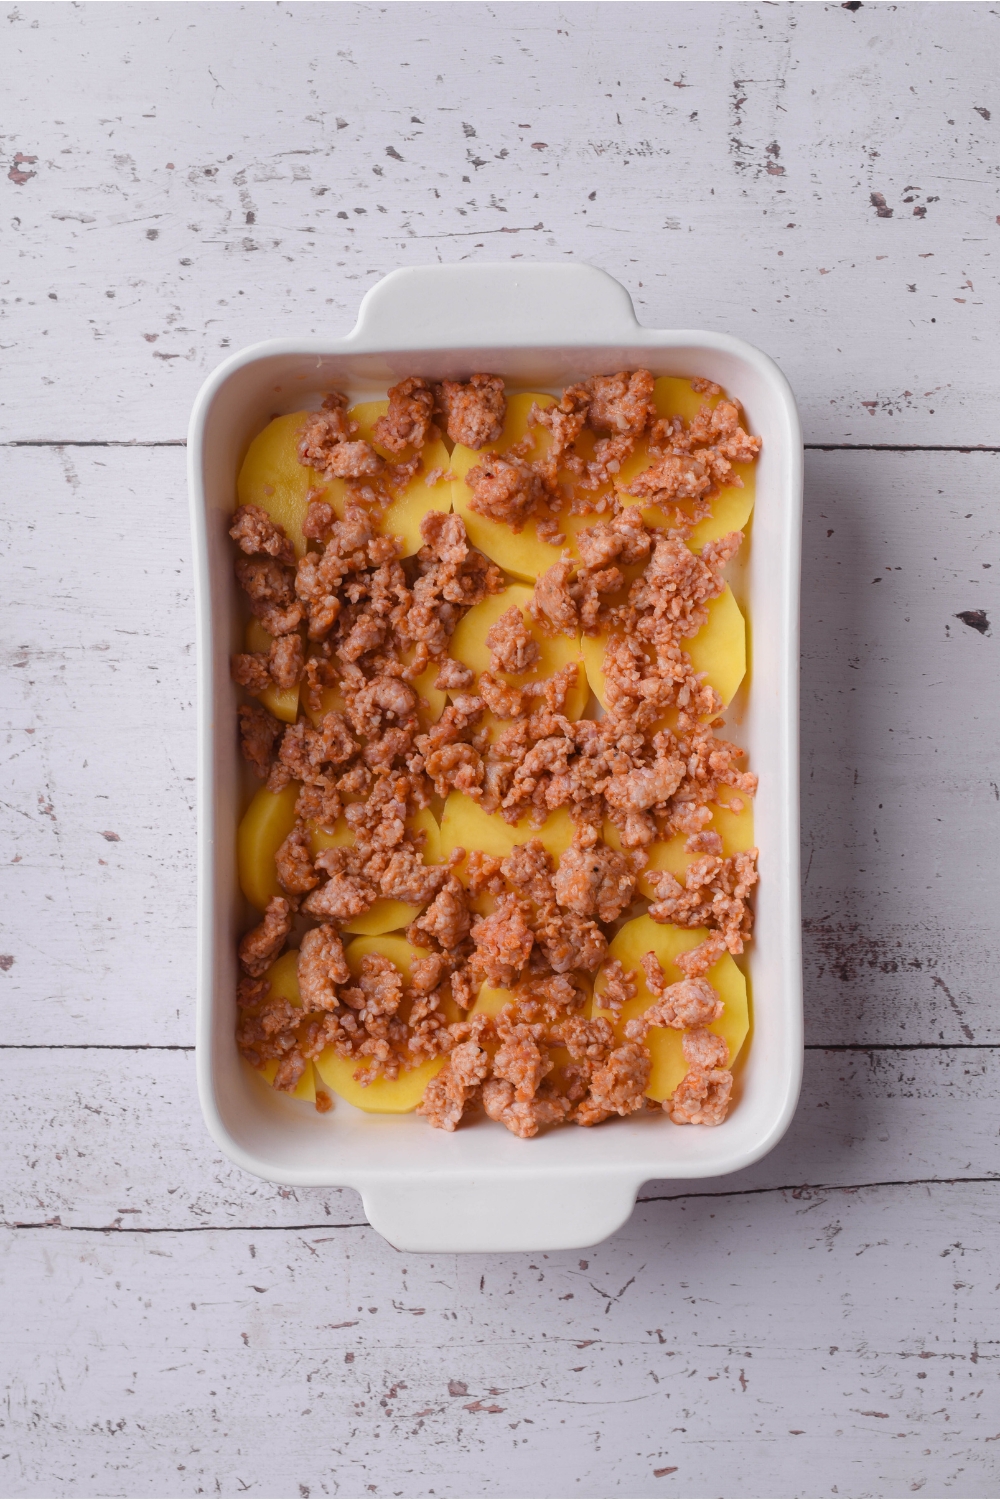 A baking dish filled with a layer of potato slices and cooked sausage on top of the potatoes.